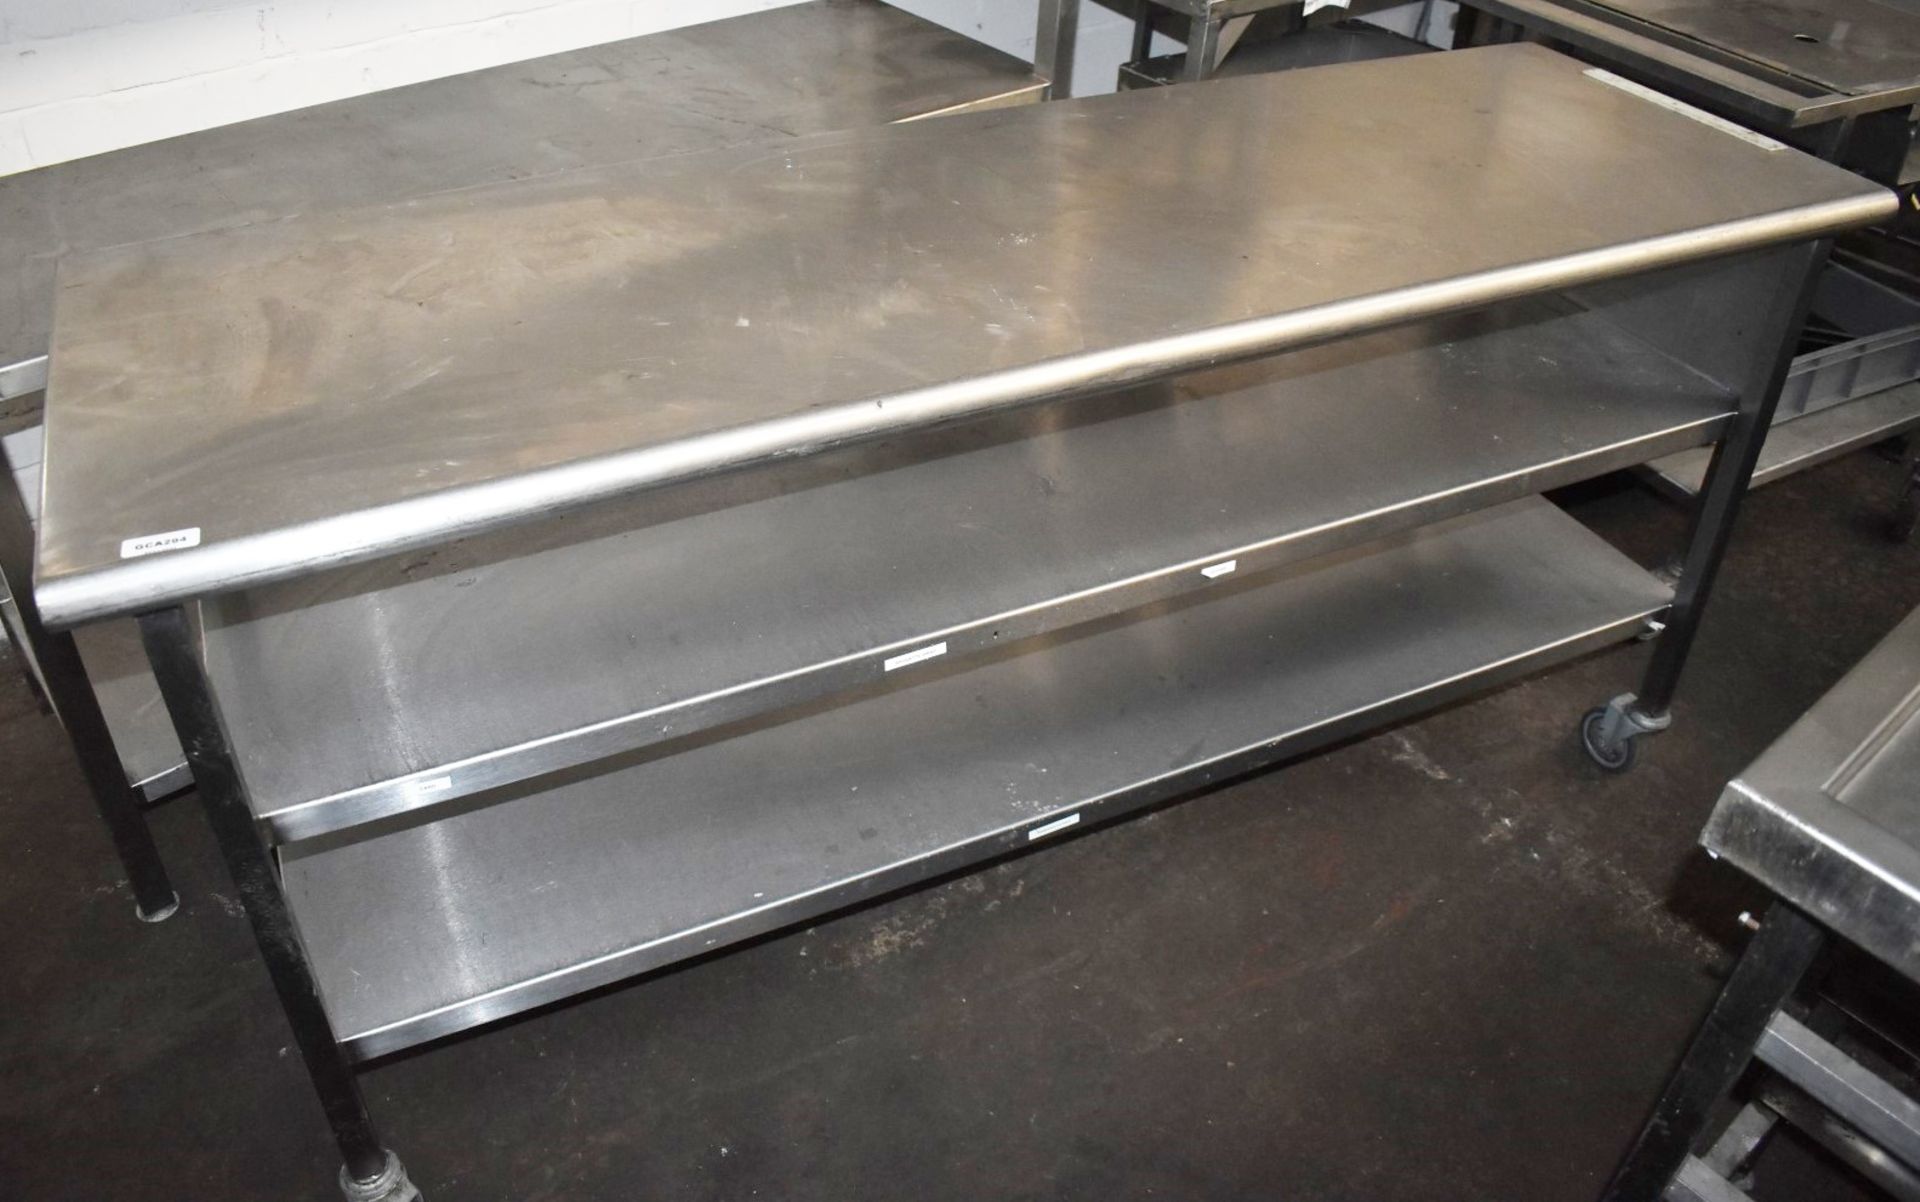 1 x Stainless Steel Prep Table Featuring Castor Wheels, Undershelves and Knife Block - Size: H87 x